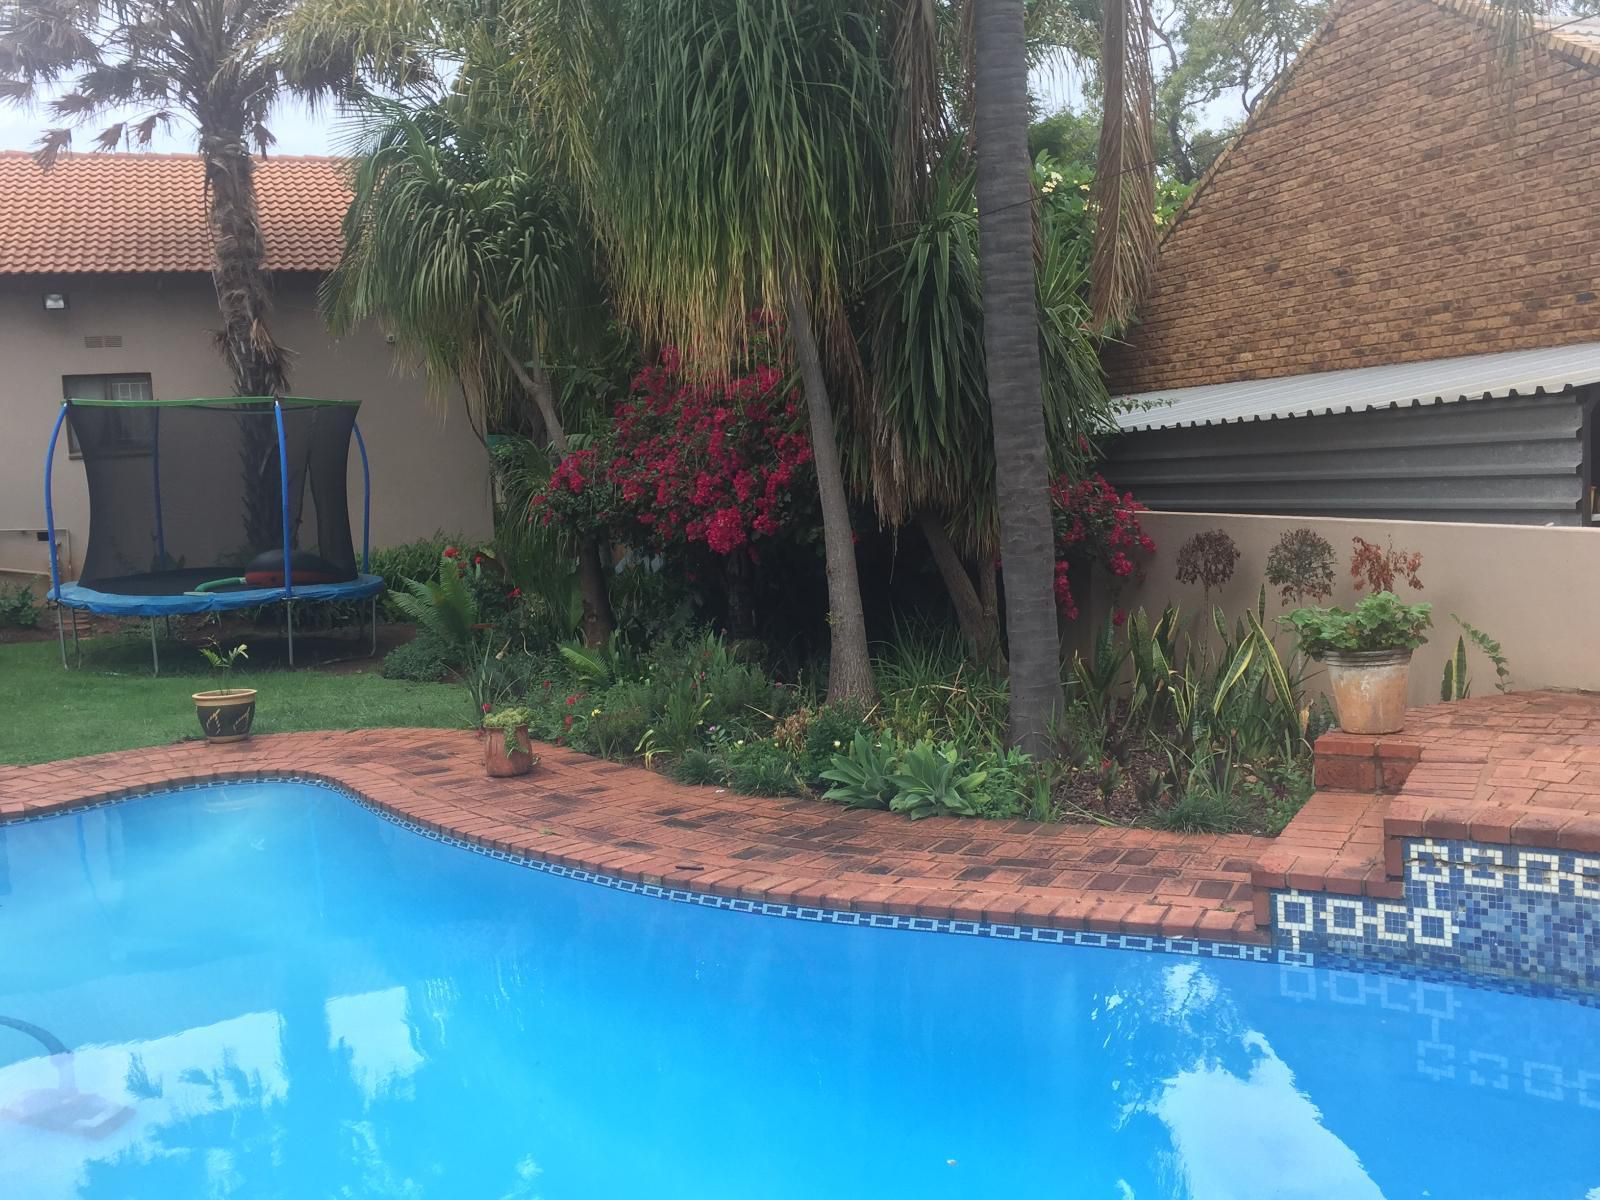 Meraki Guesthouse Cashan Rustenburg North West Province South Africa Palm Tree, Plant, Nature, Wood, Garden, Swimming Pool